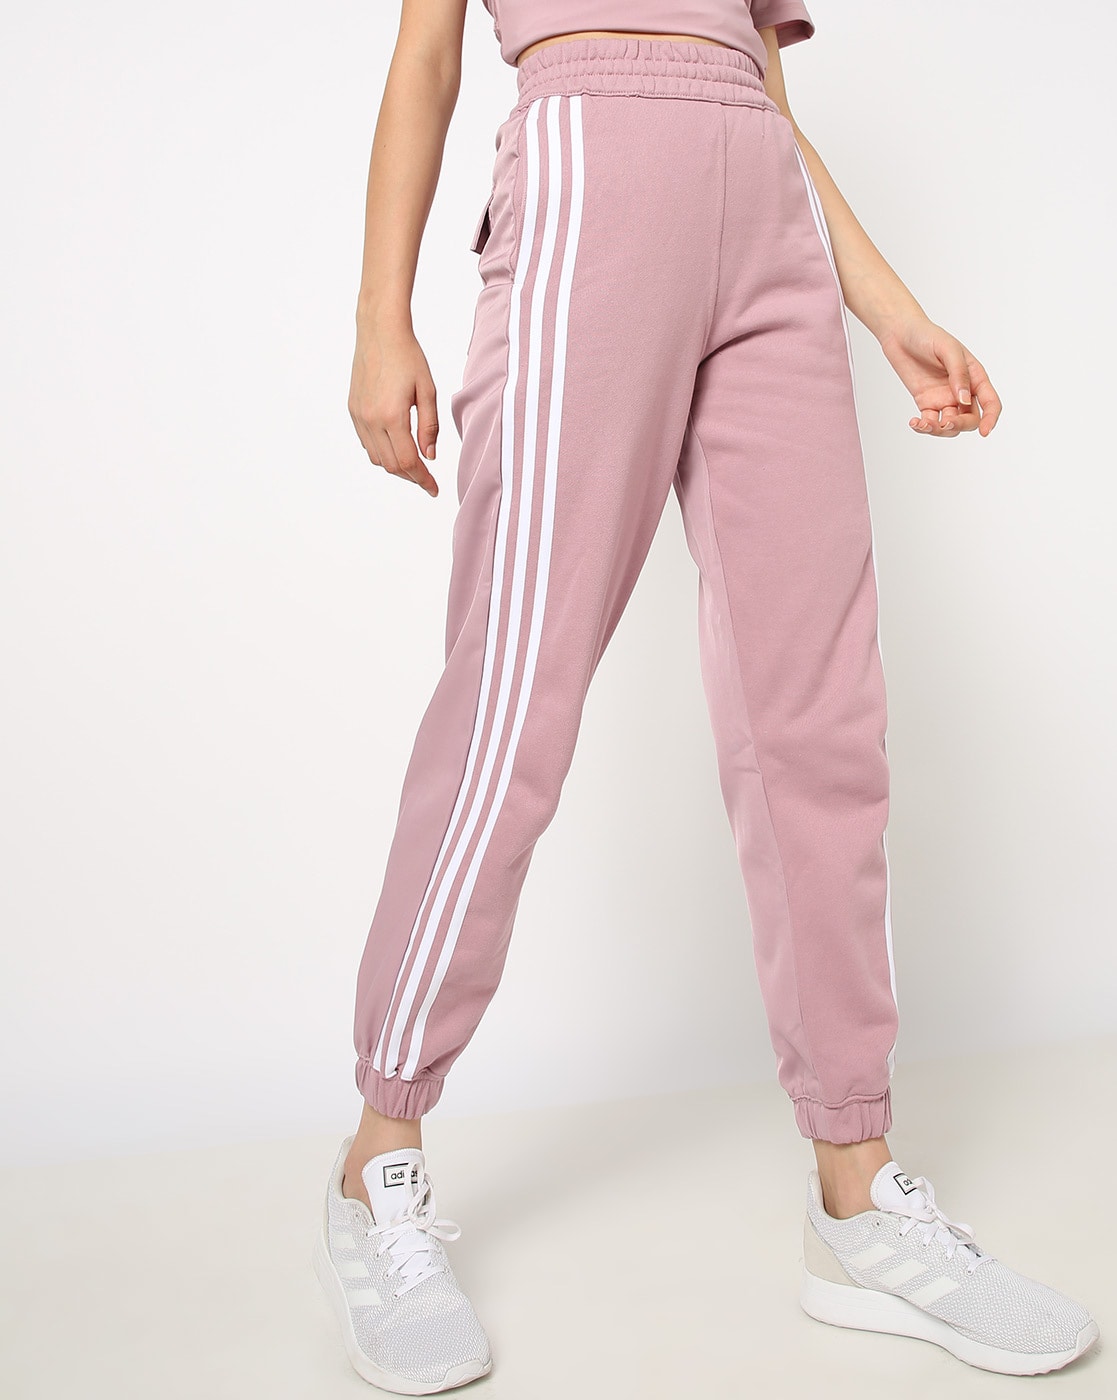 Women Joggers sale | adidas official UK Outlet